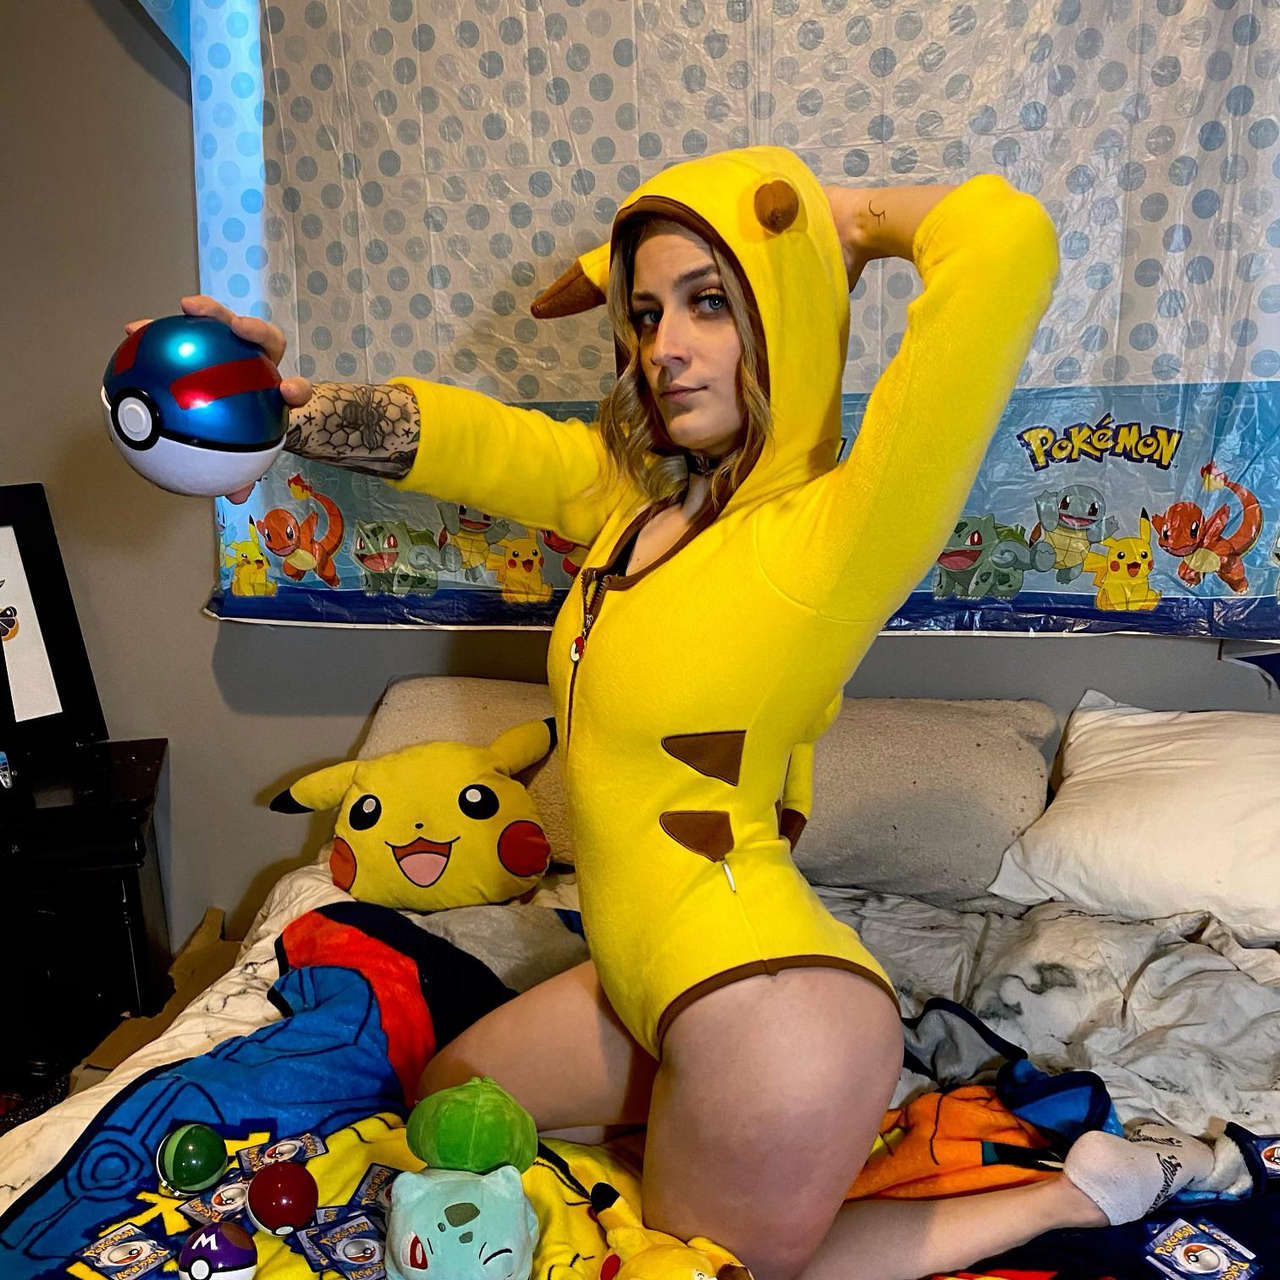 Amberluv As Pikachu F Irst Post Here Come Say Hiiiii Shot By My Siste